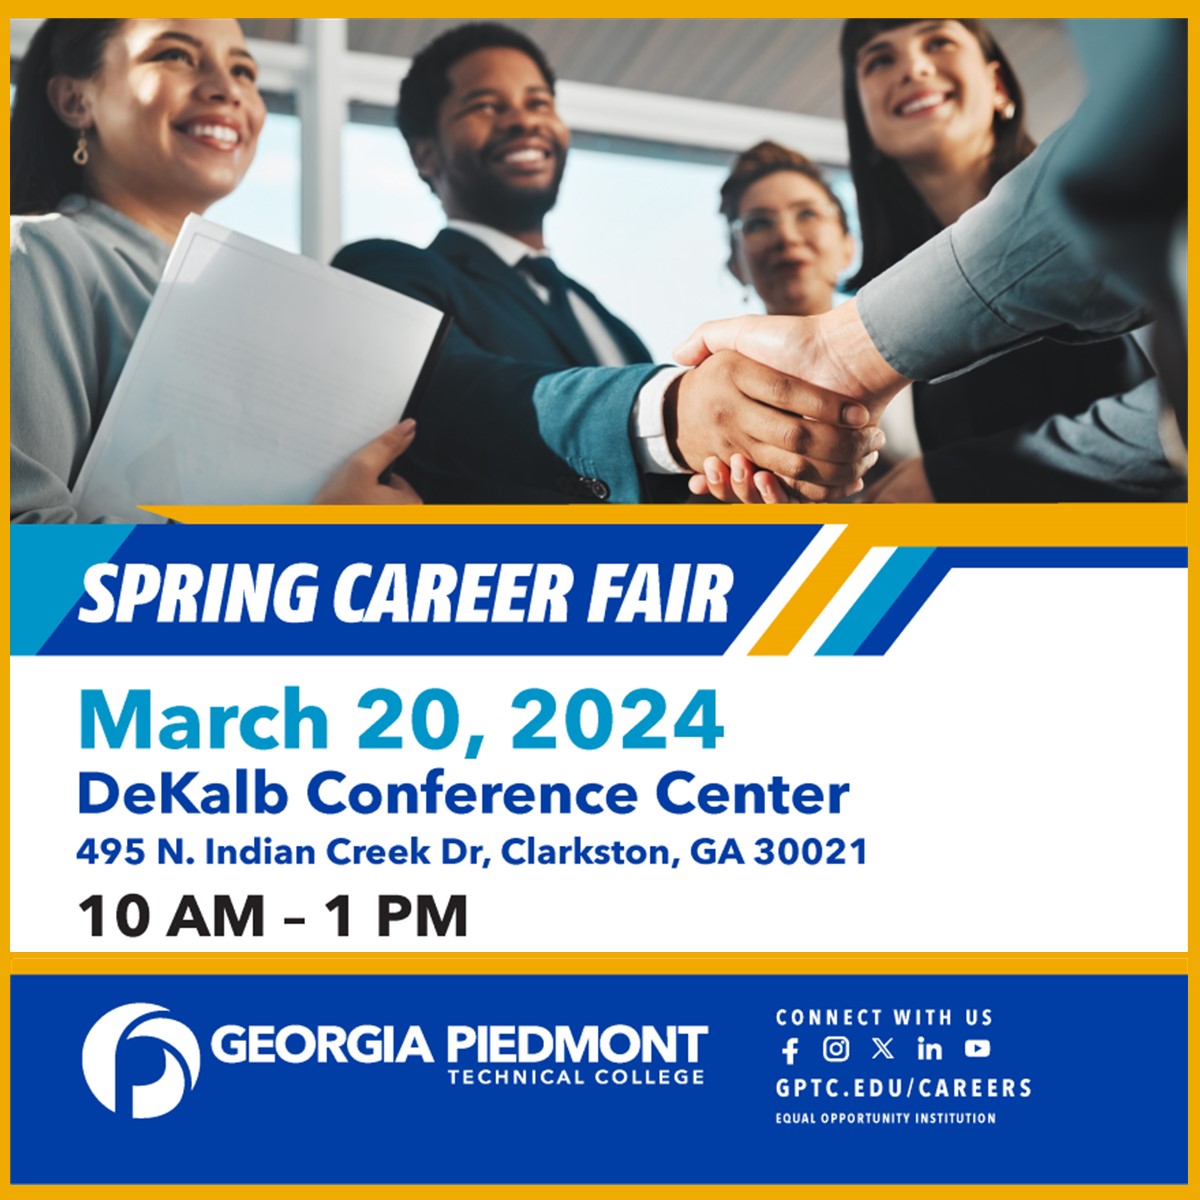 Mark your calendar for one week from today as dozens of reps from various industries will be at the DeKalb Conference Center for our Spring Career Fair. All are welcome! For more info, call 404-297-9522, ext. 1183 or email careers@gptc.edu.